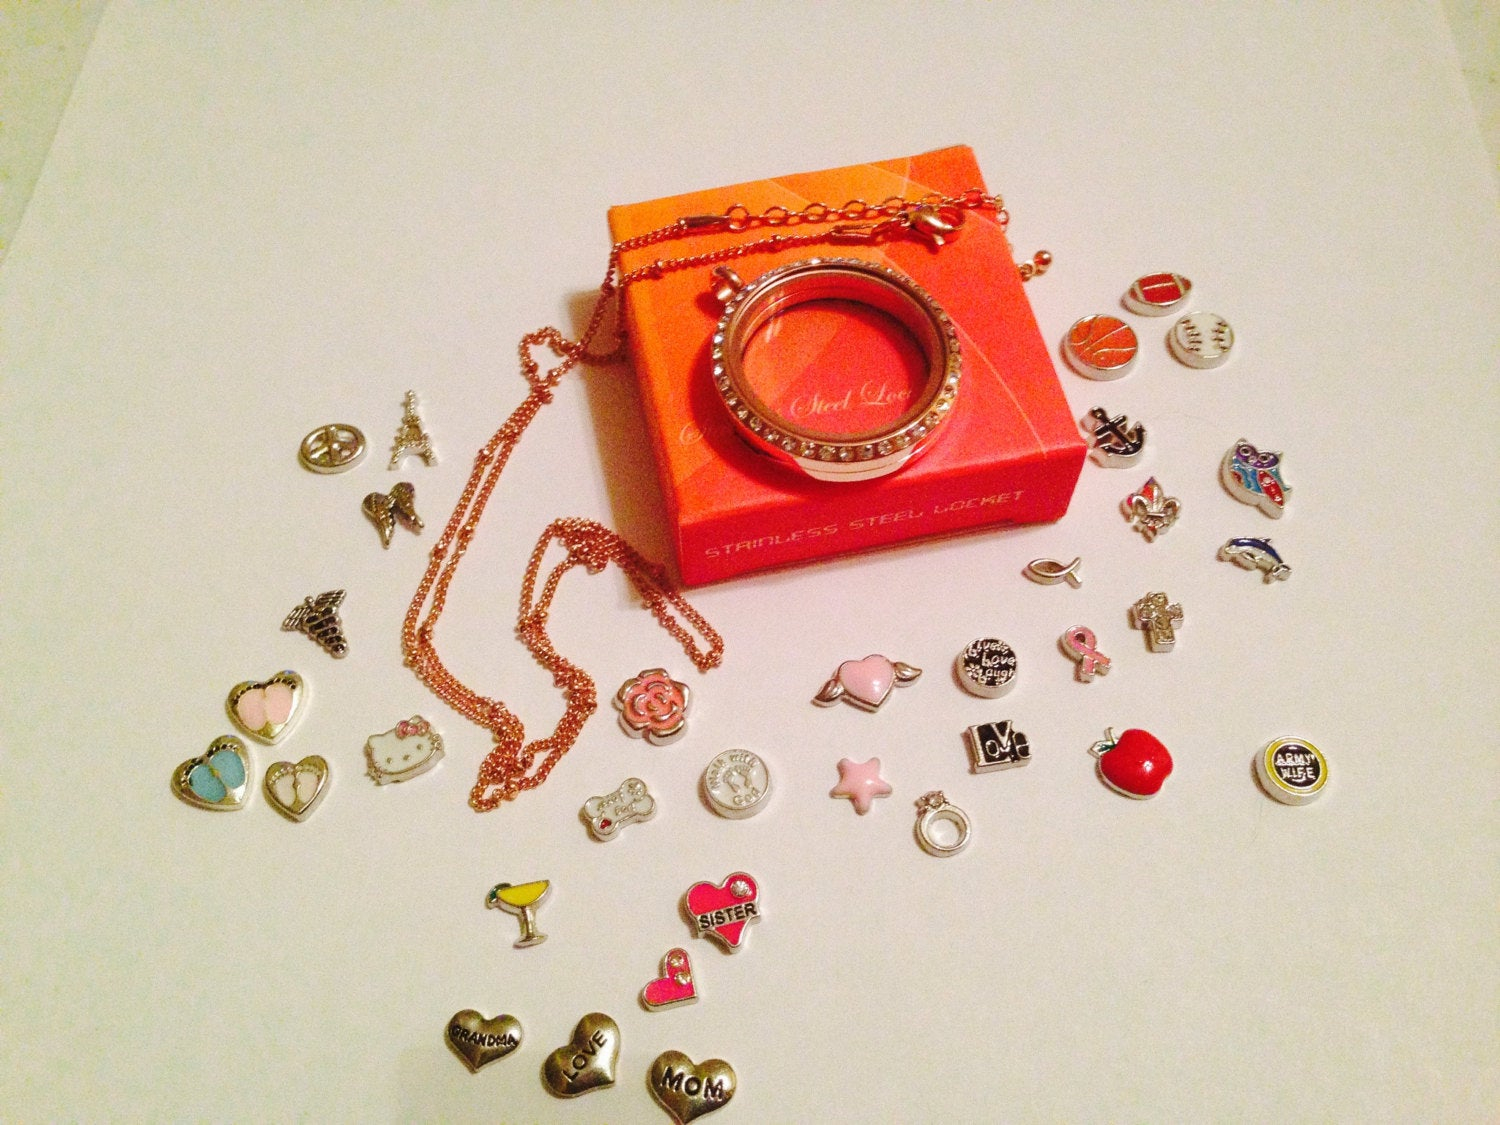 How Many Charms Fit In An Origami Owl Locket Gold Tone Charms Fit Floating Lockets Including Origami Owl